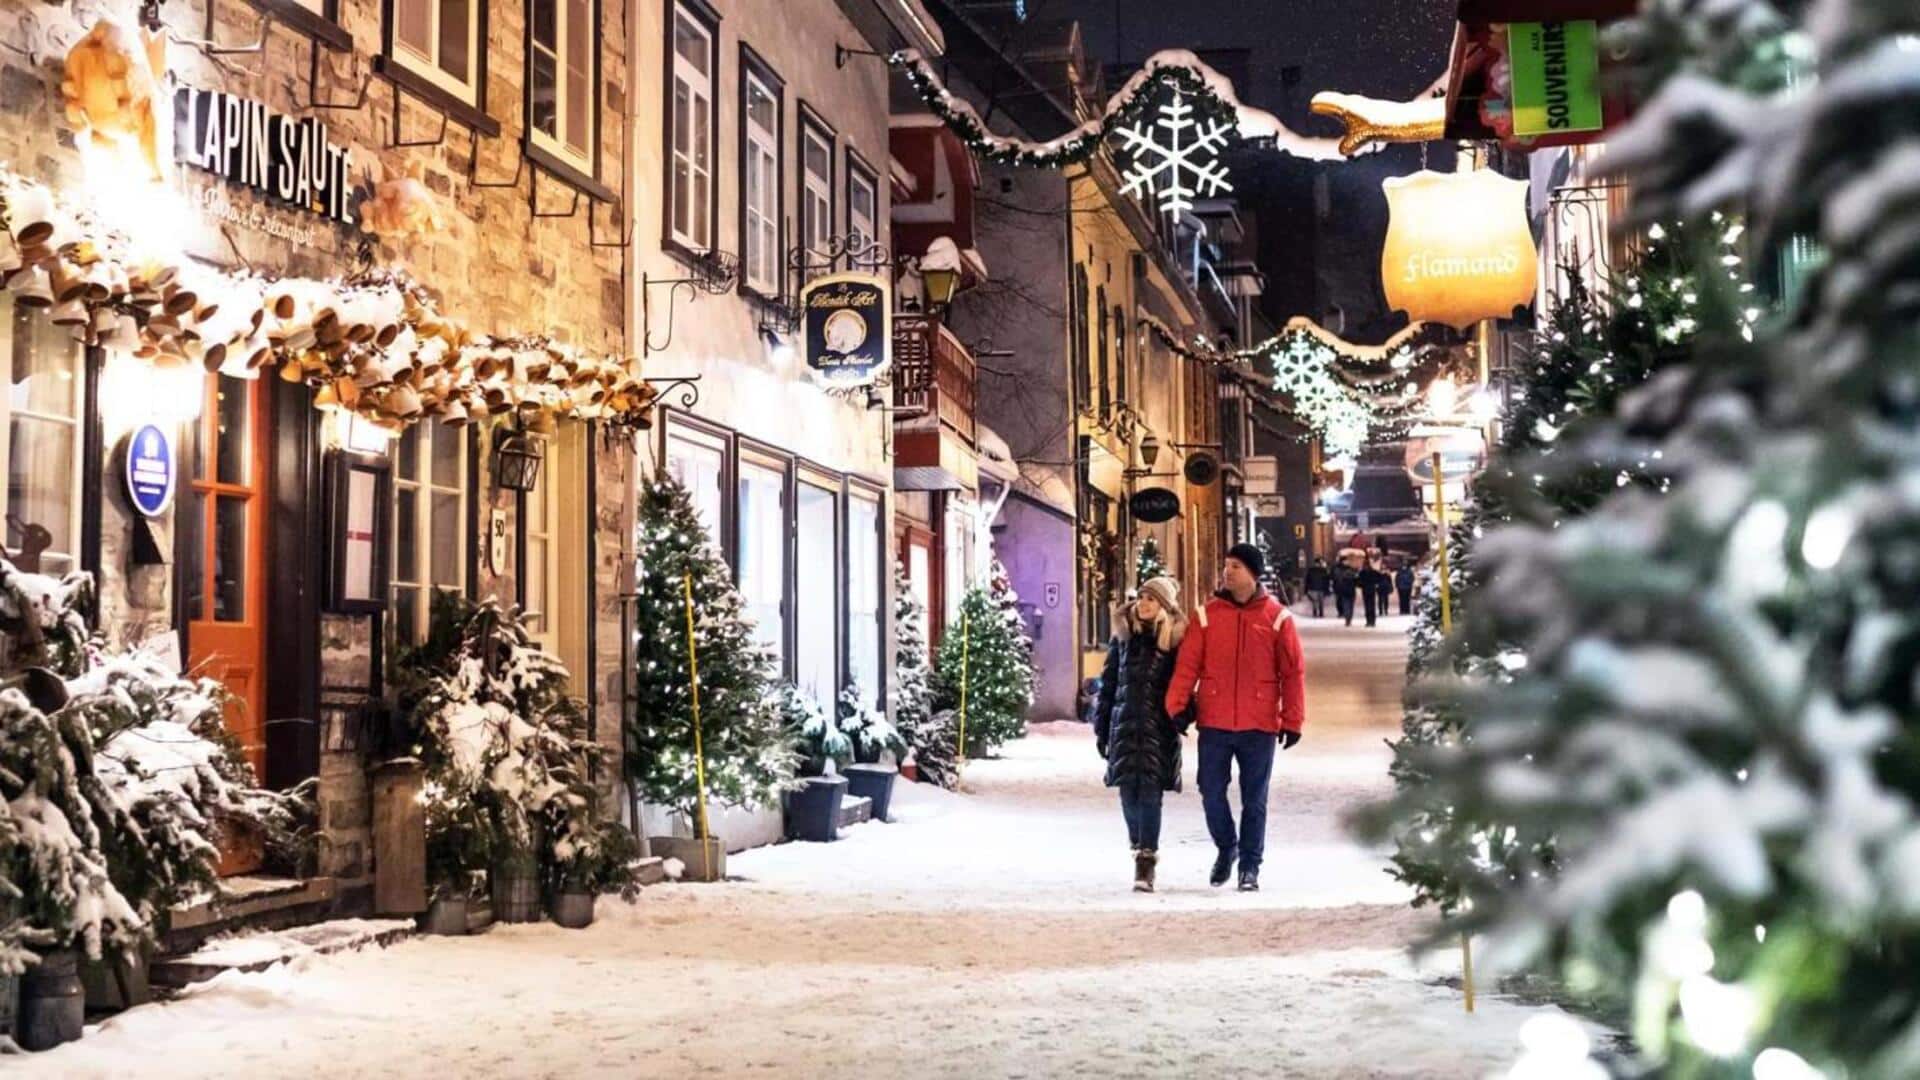 Explore Quebec City's winter wonderland with this travel guide